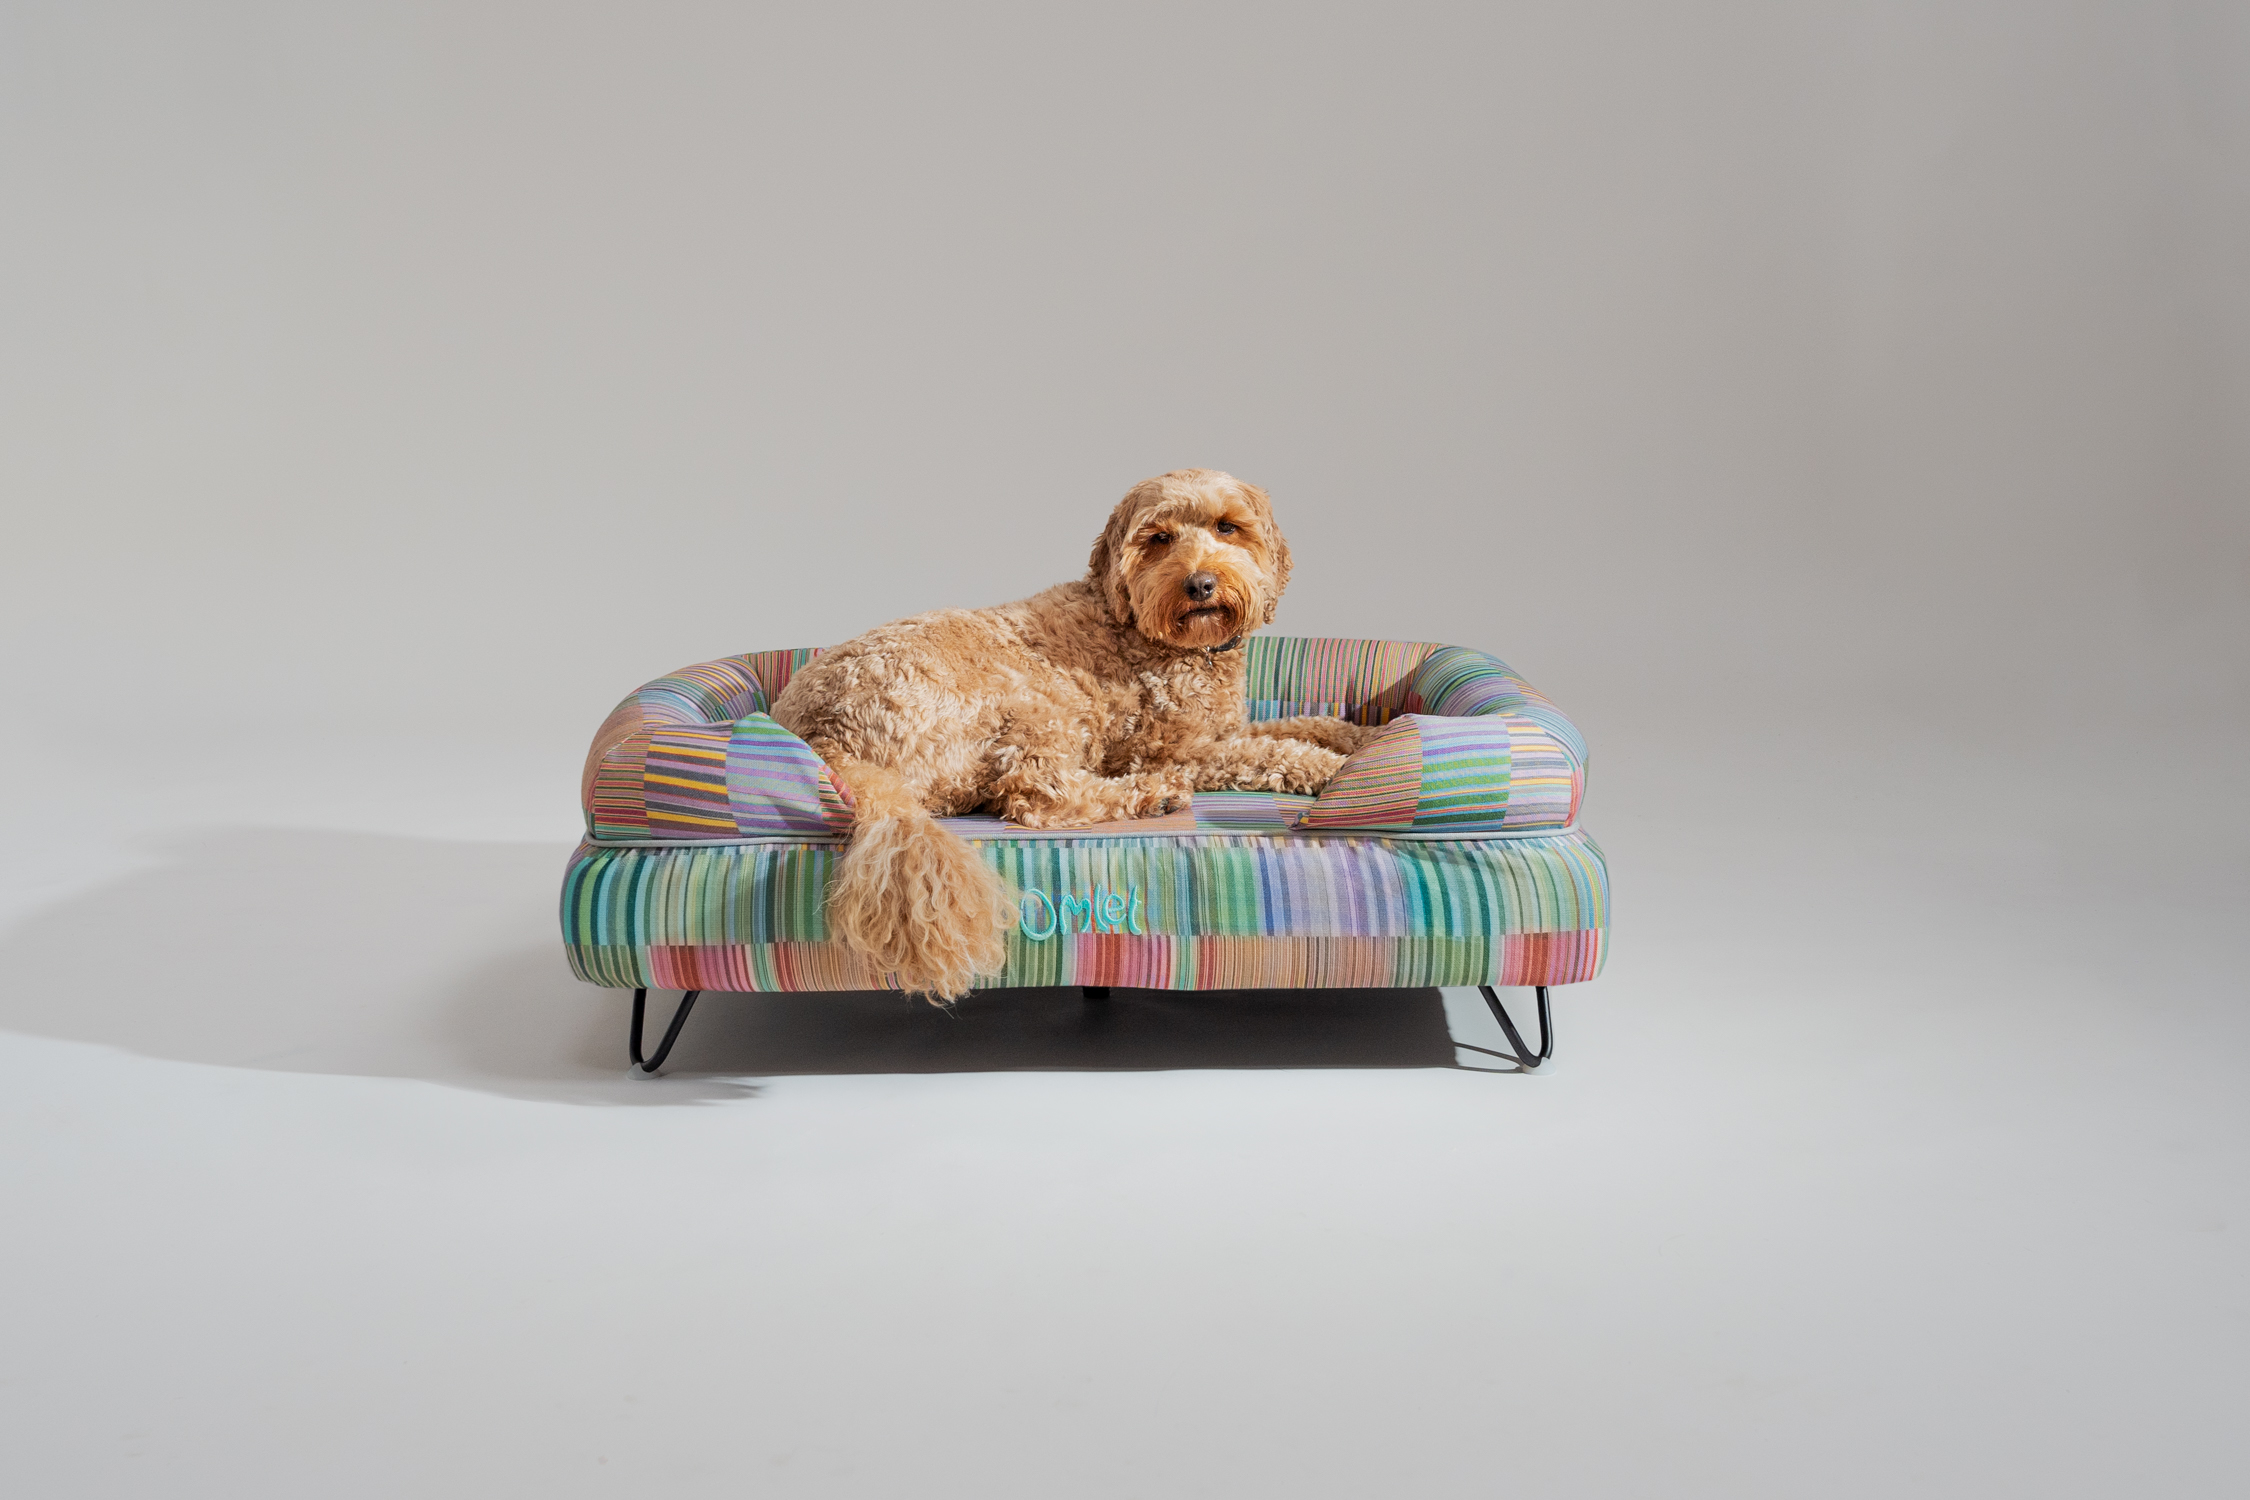 Poodle cross on their Omlet Bolster dog bed in Pawsteps Electric